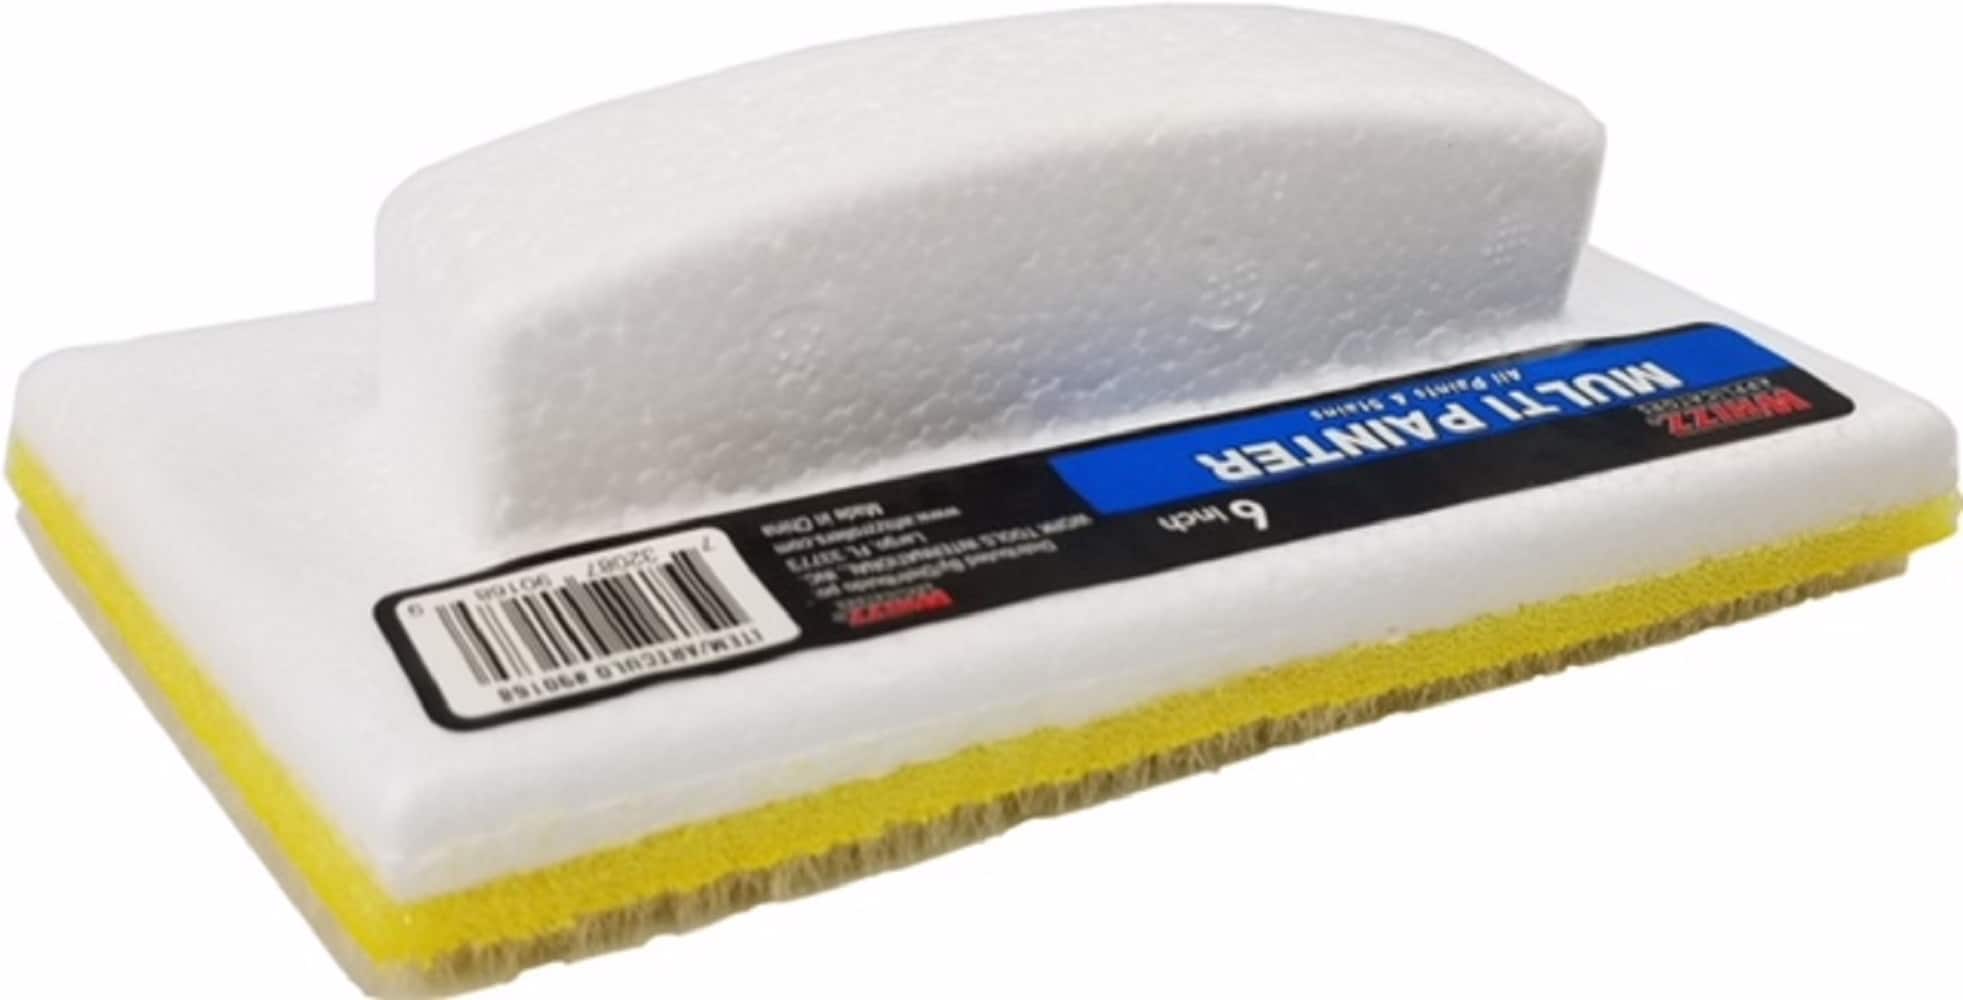 Whizz 20153 Paint Pad Refill, 9 in L Pad #VORG7372410, 20153